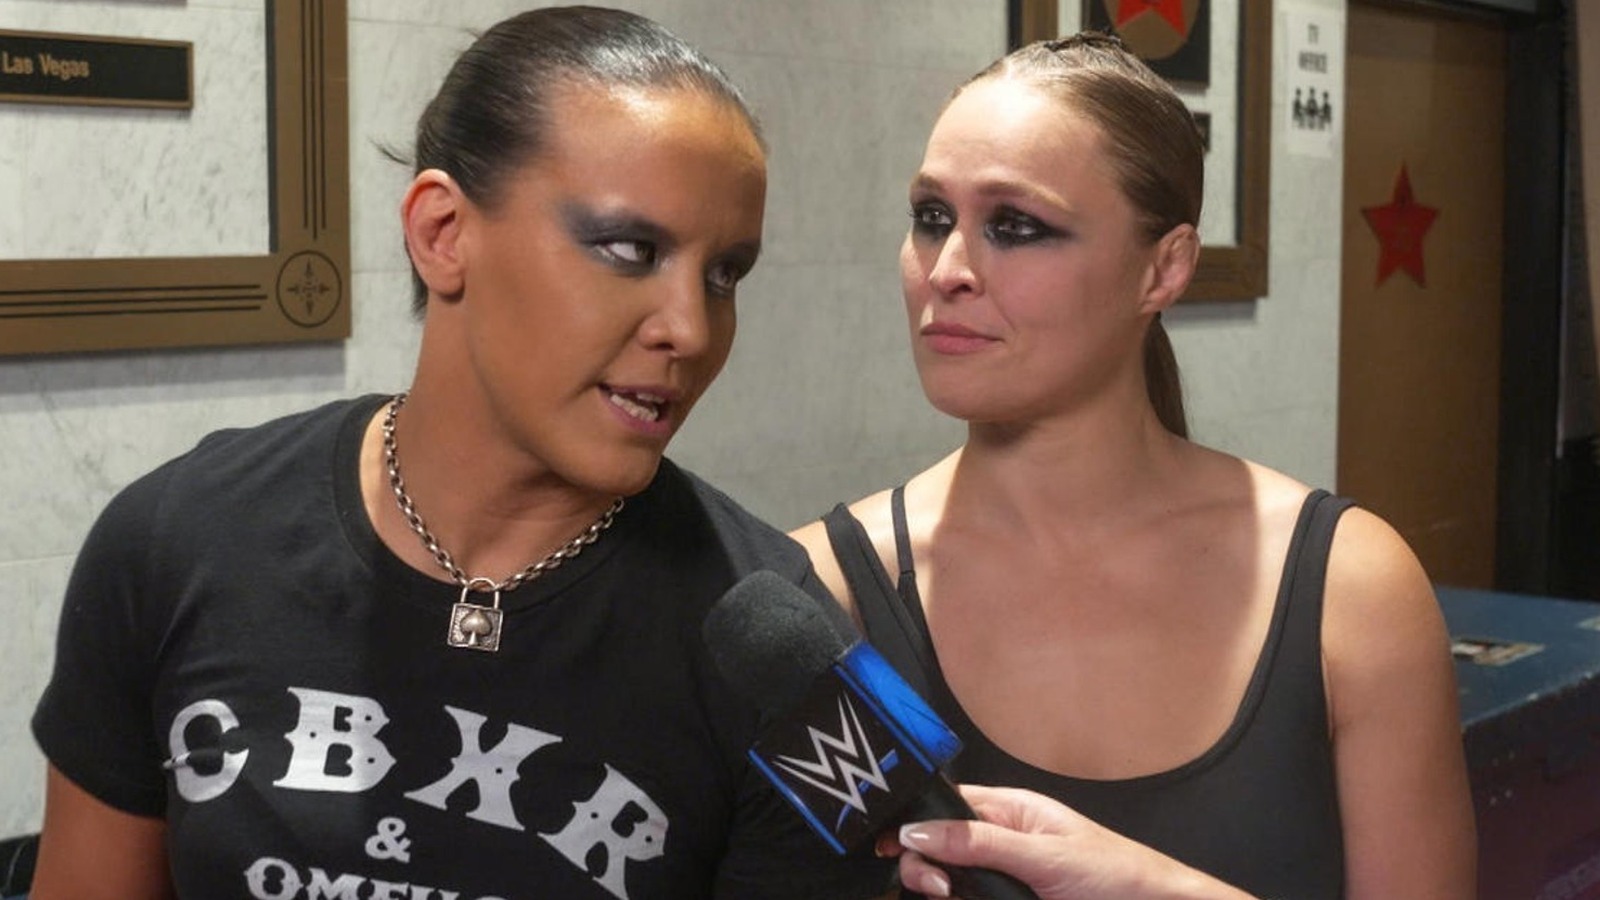 Shayna Baszler Turns On Ronda Rousey, Loses Women's Tag Titles At WWE Money In The Bank